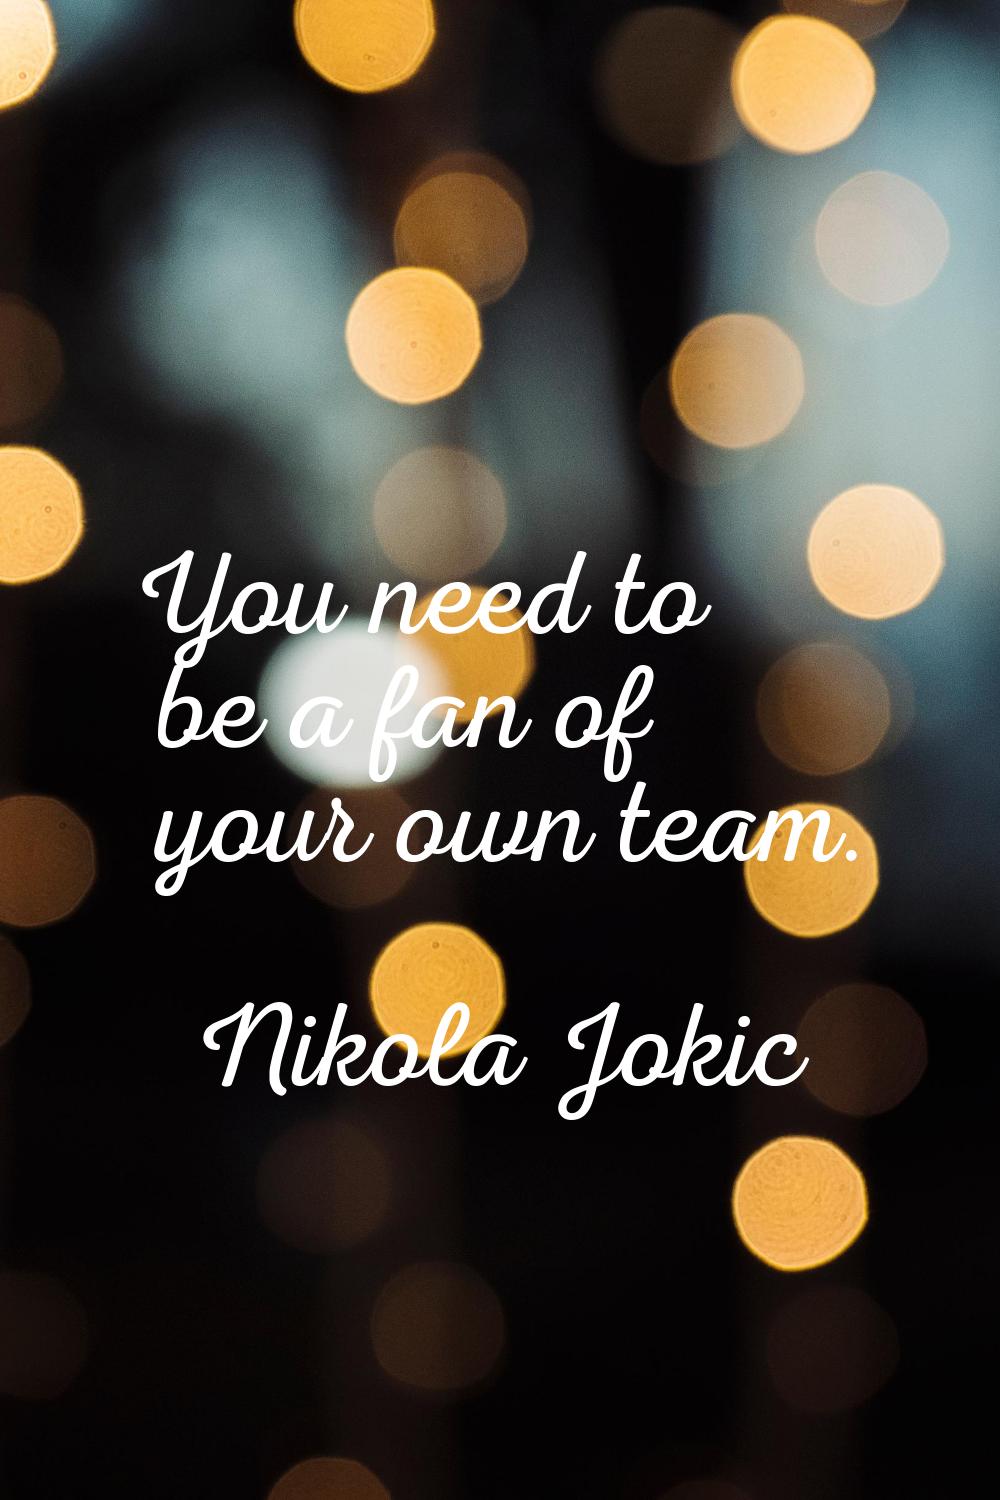 You need to be a fan of your own team.